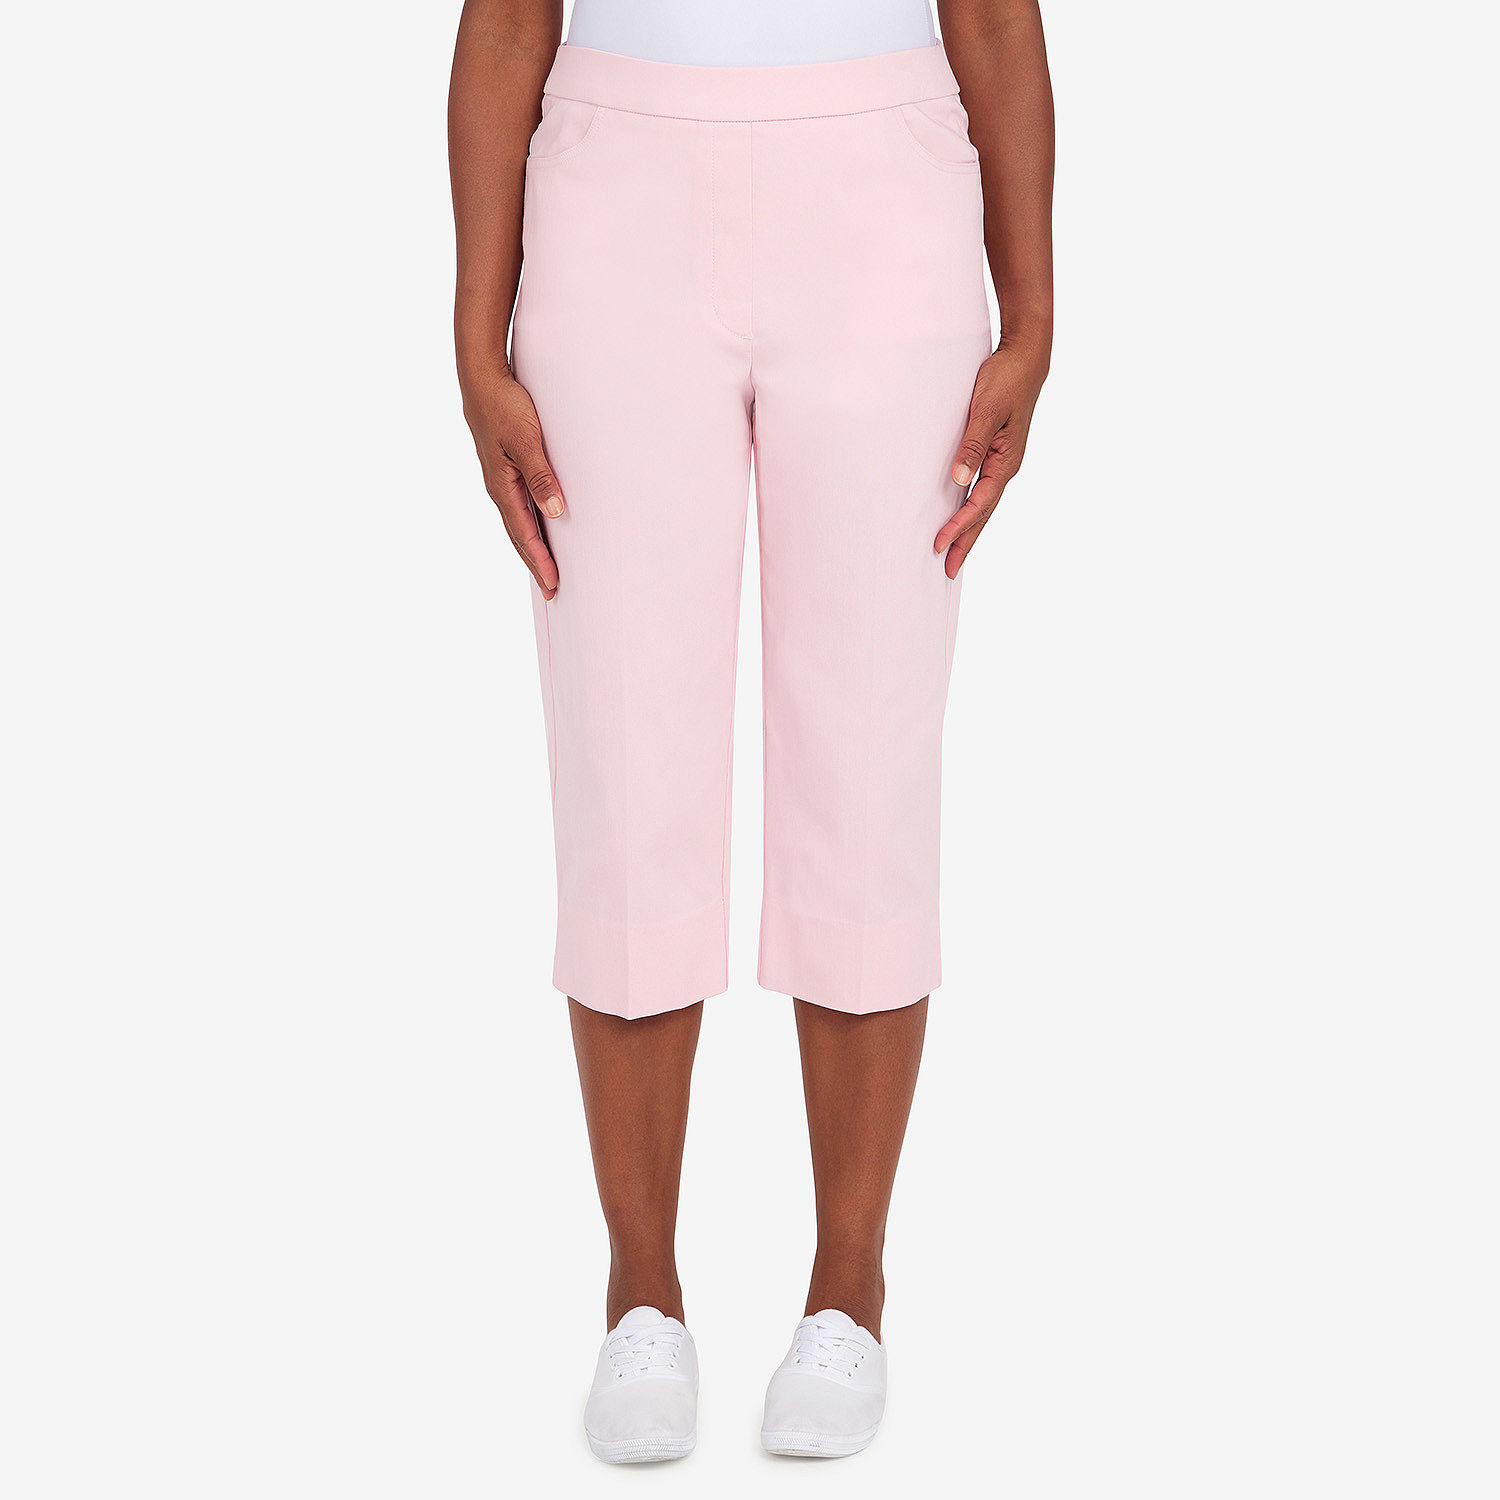 Alfred Dunner Classics Capris - JCPenney